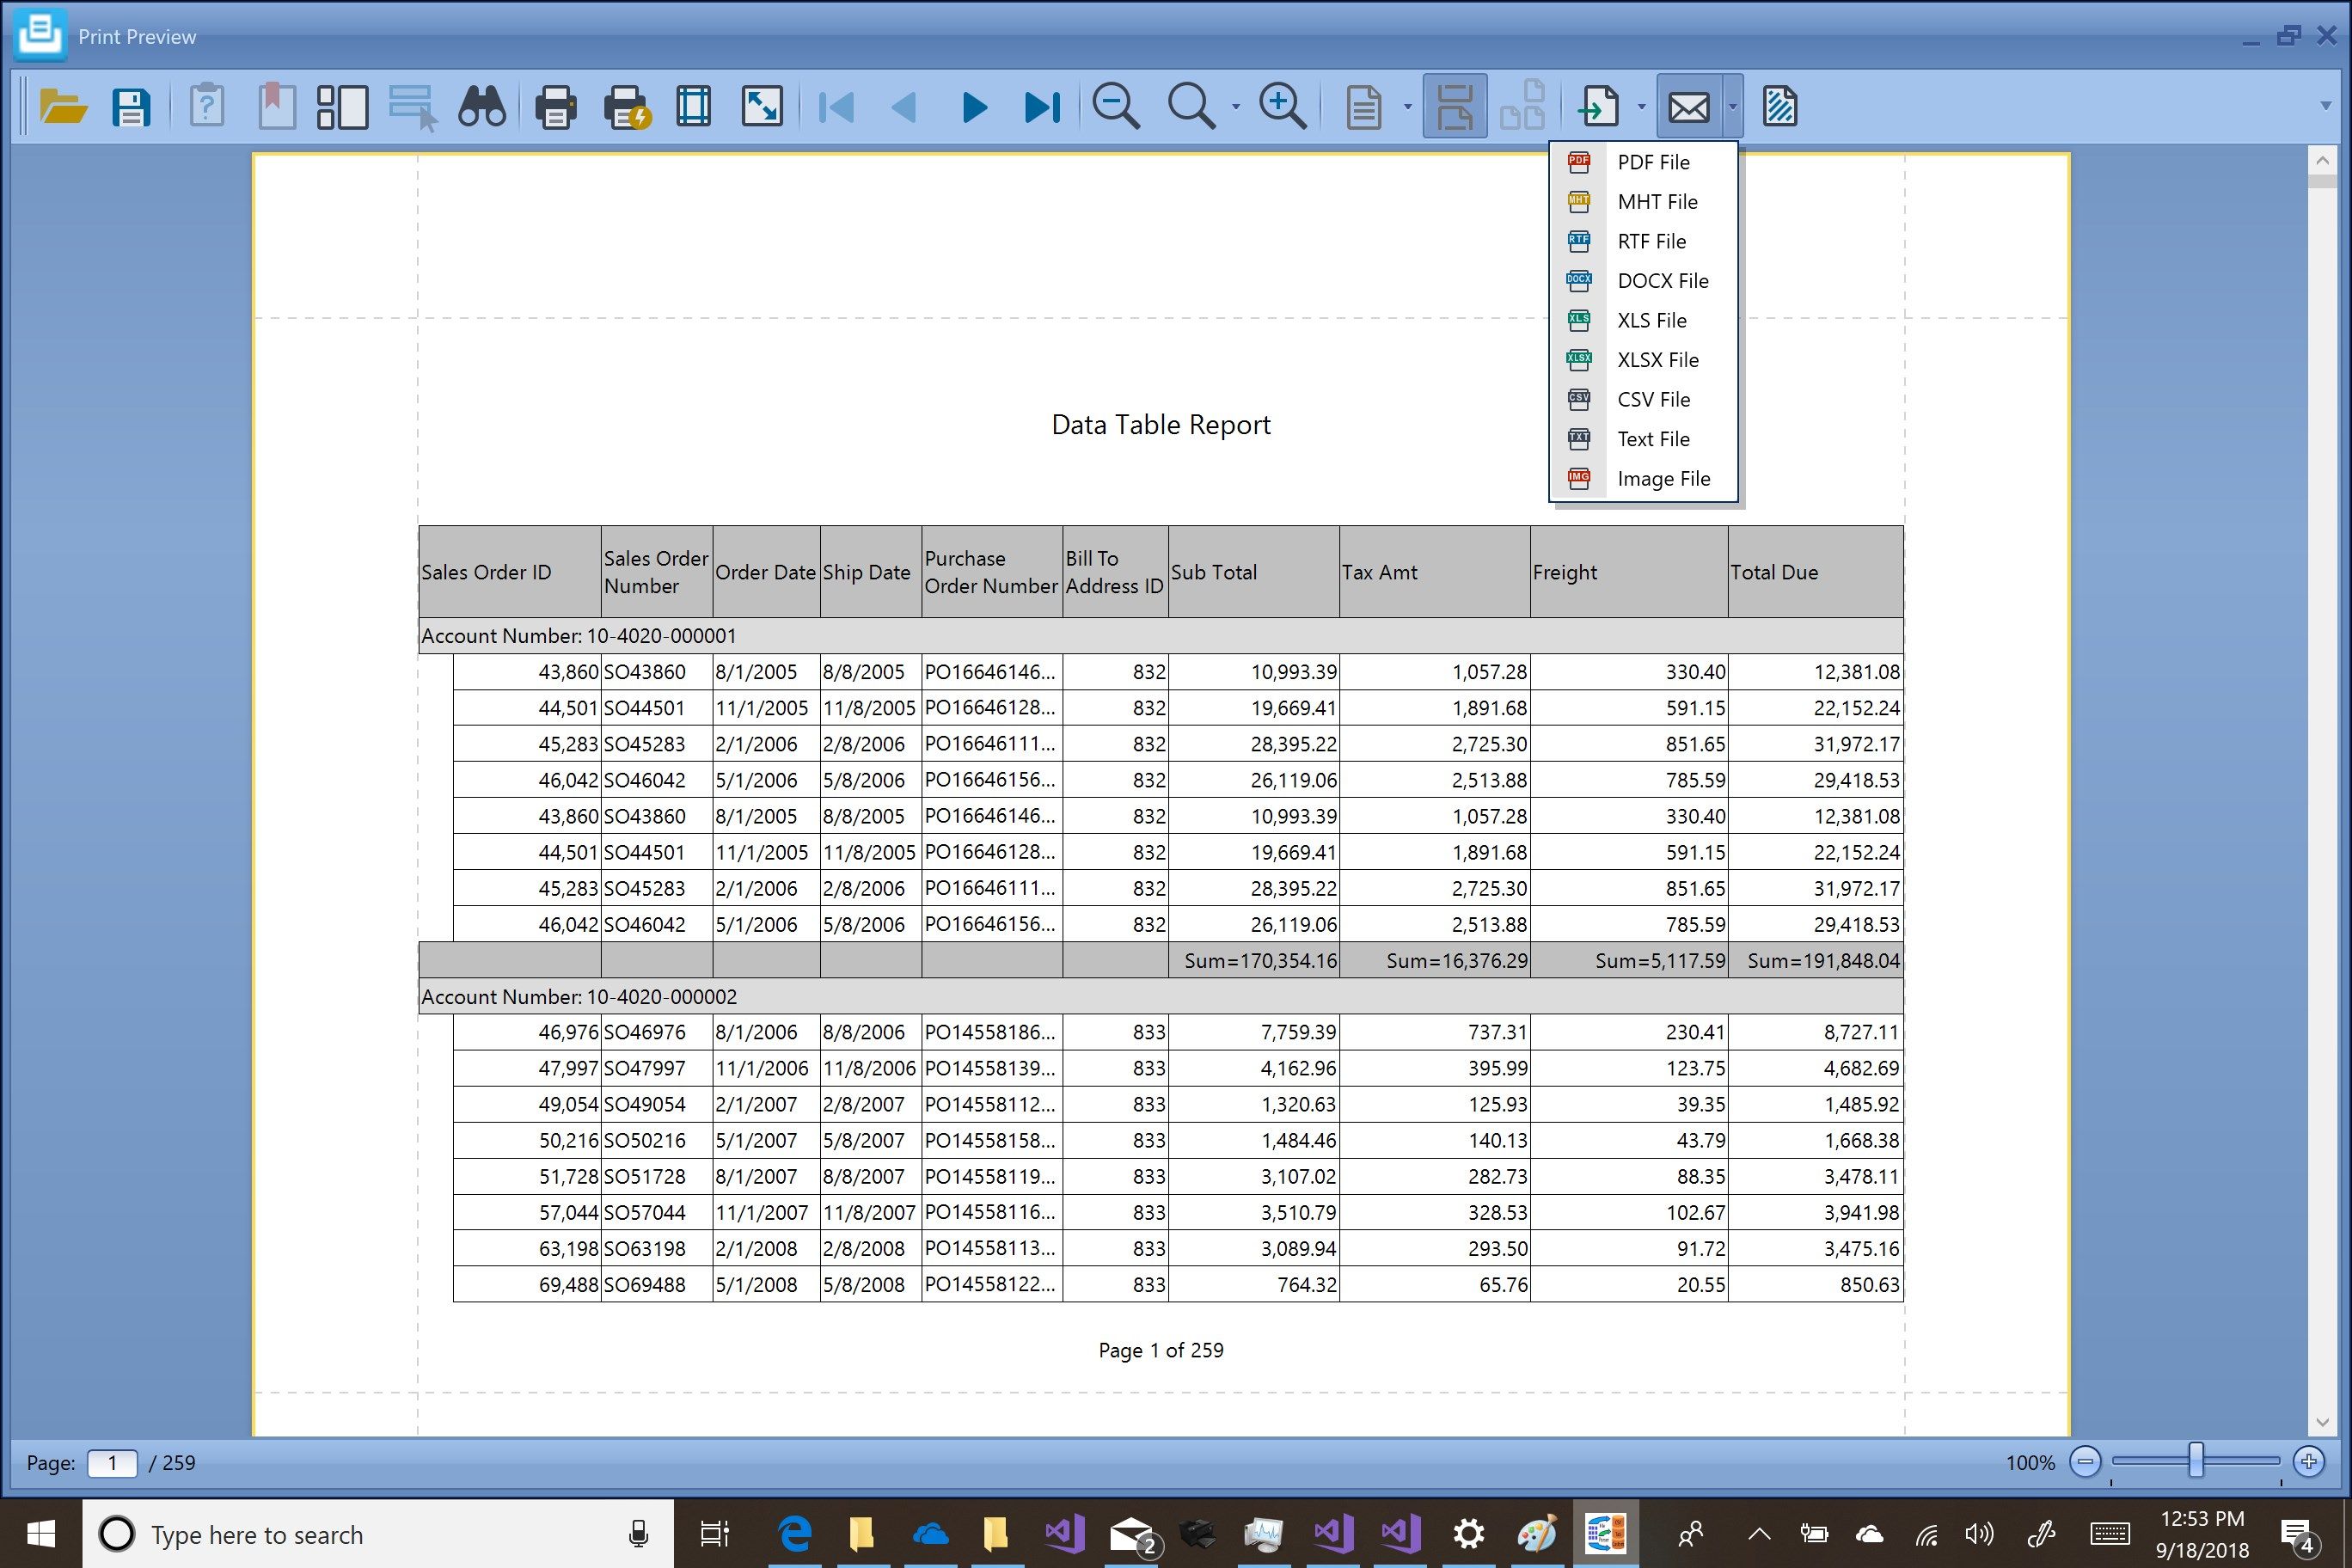 Data grid report can be printed and exported to several file formats.